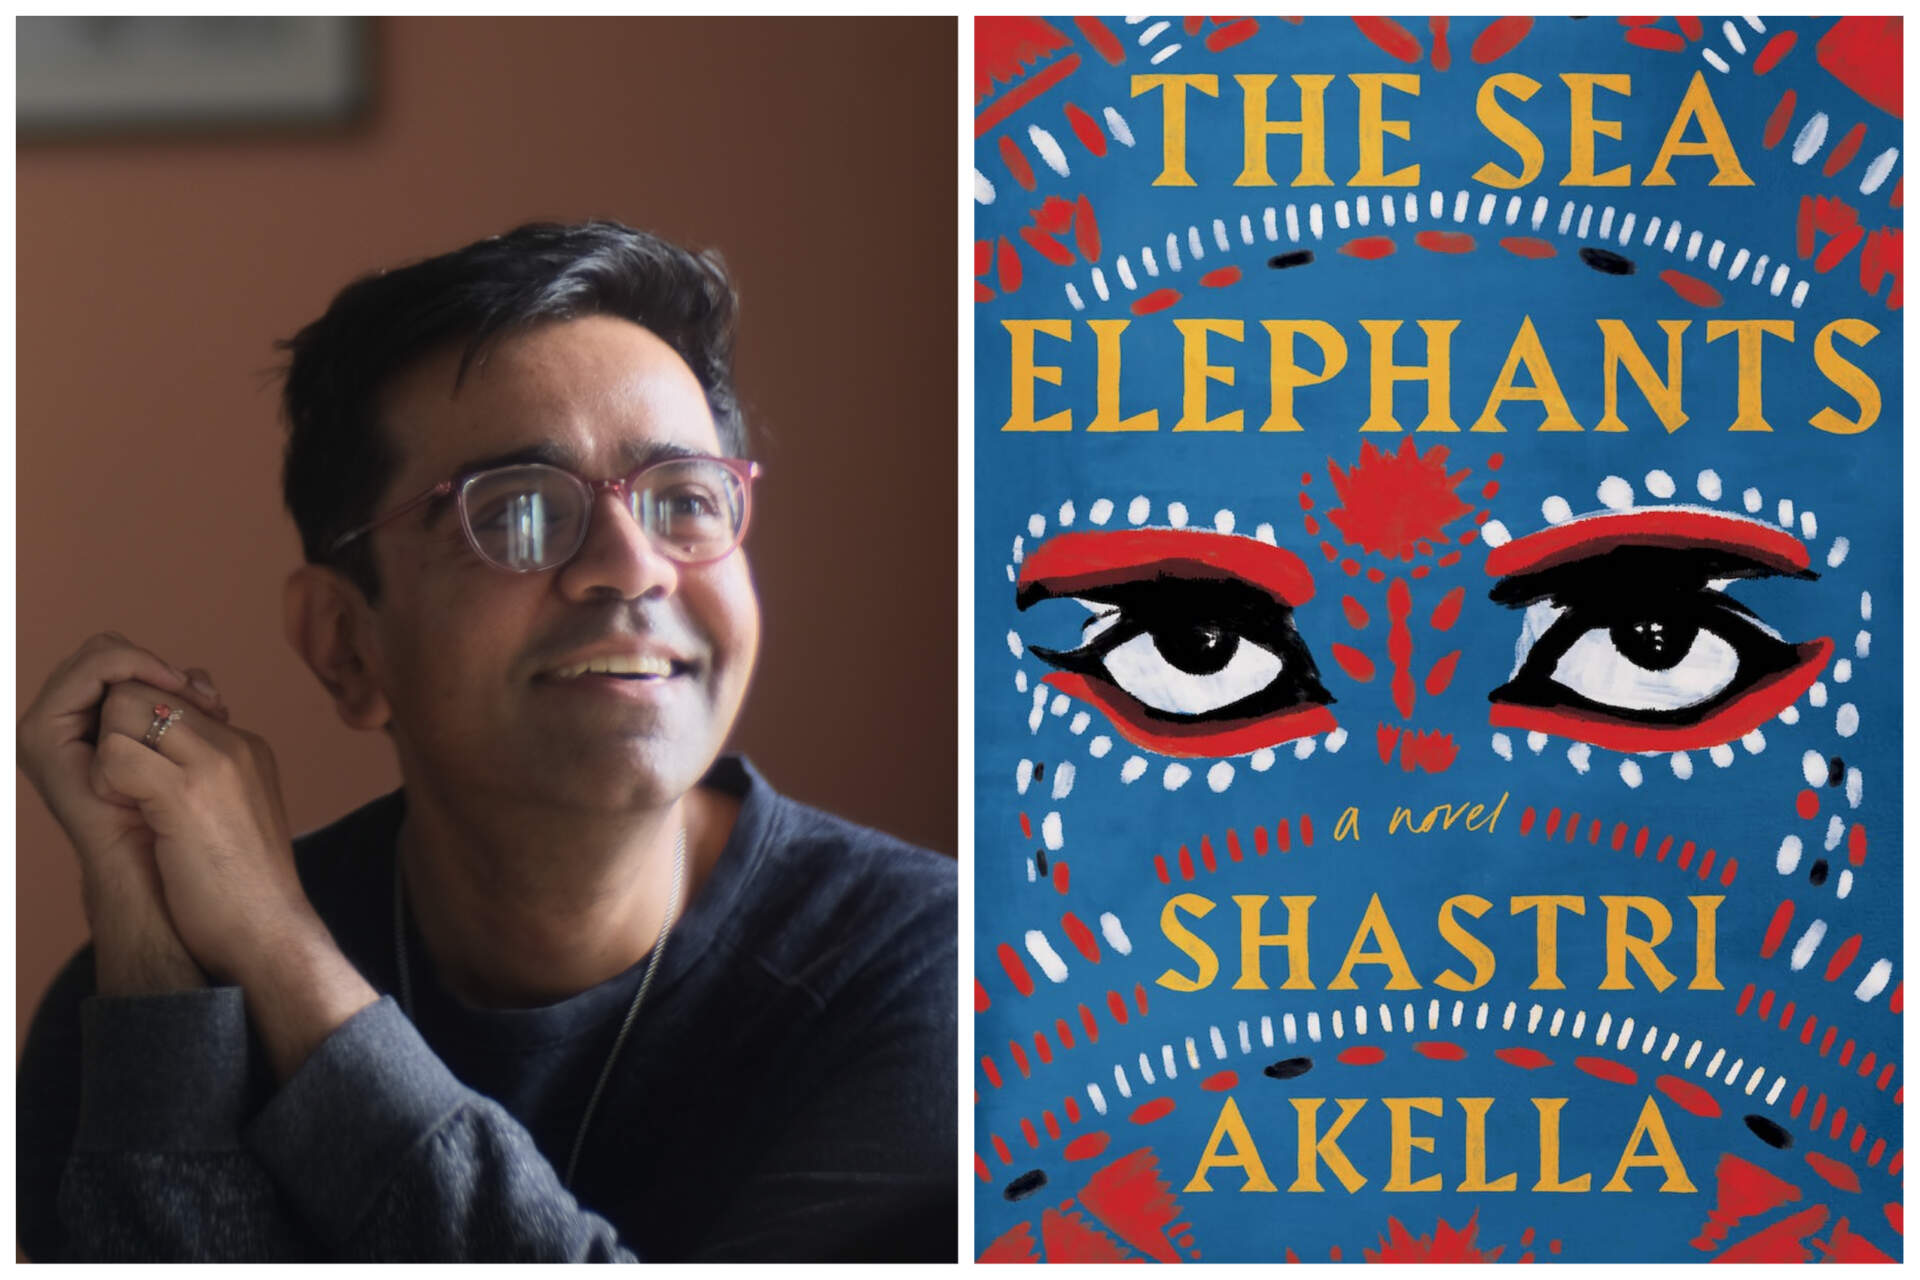 Shastri Akella’s debut novel &quot;The Sea Elephants&quot; is out now. (Author photo courtesy Subhadra Madhavan; book cover courtesy of the publisher)